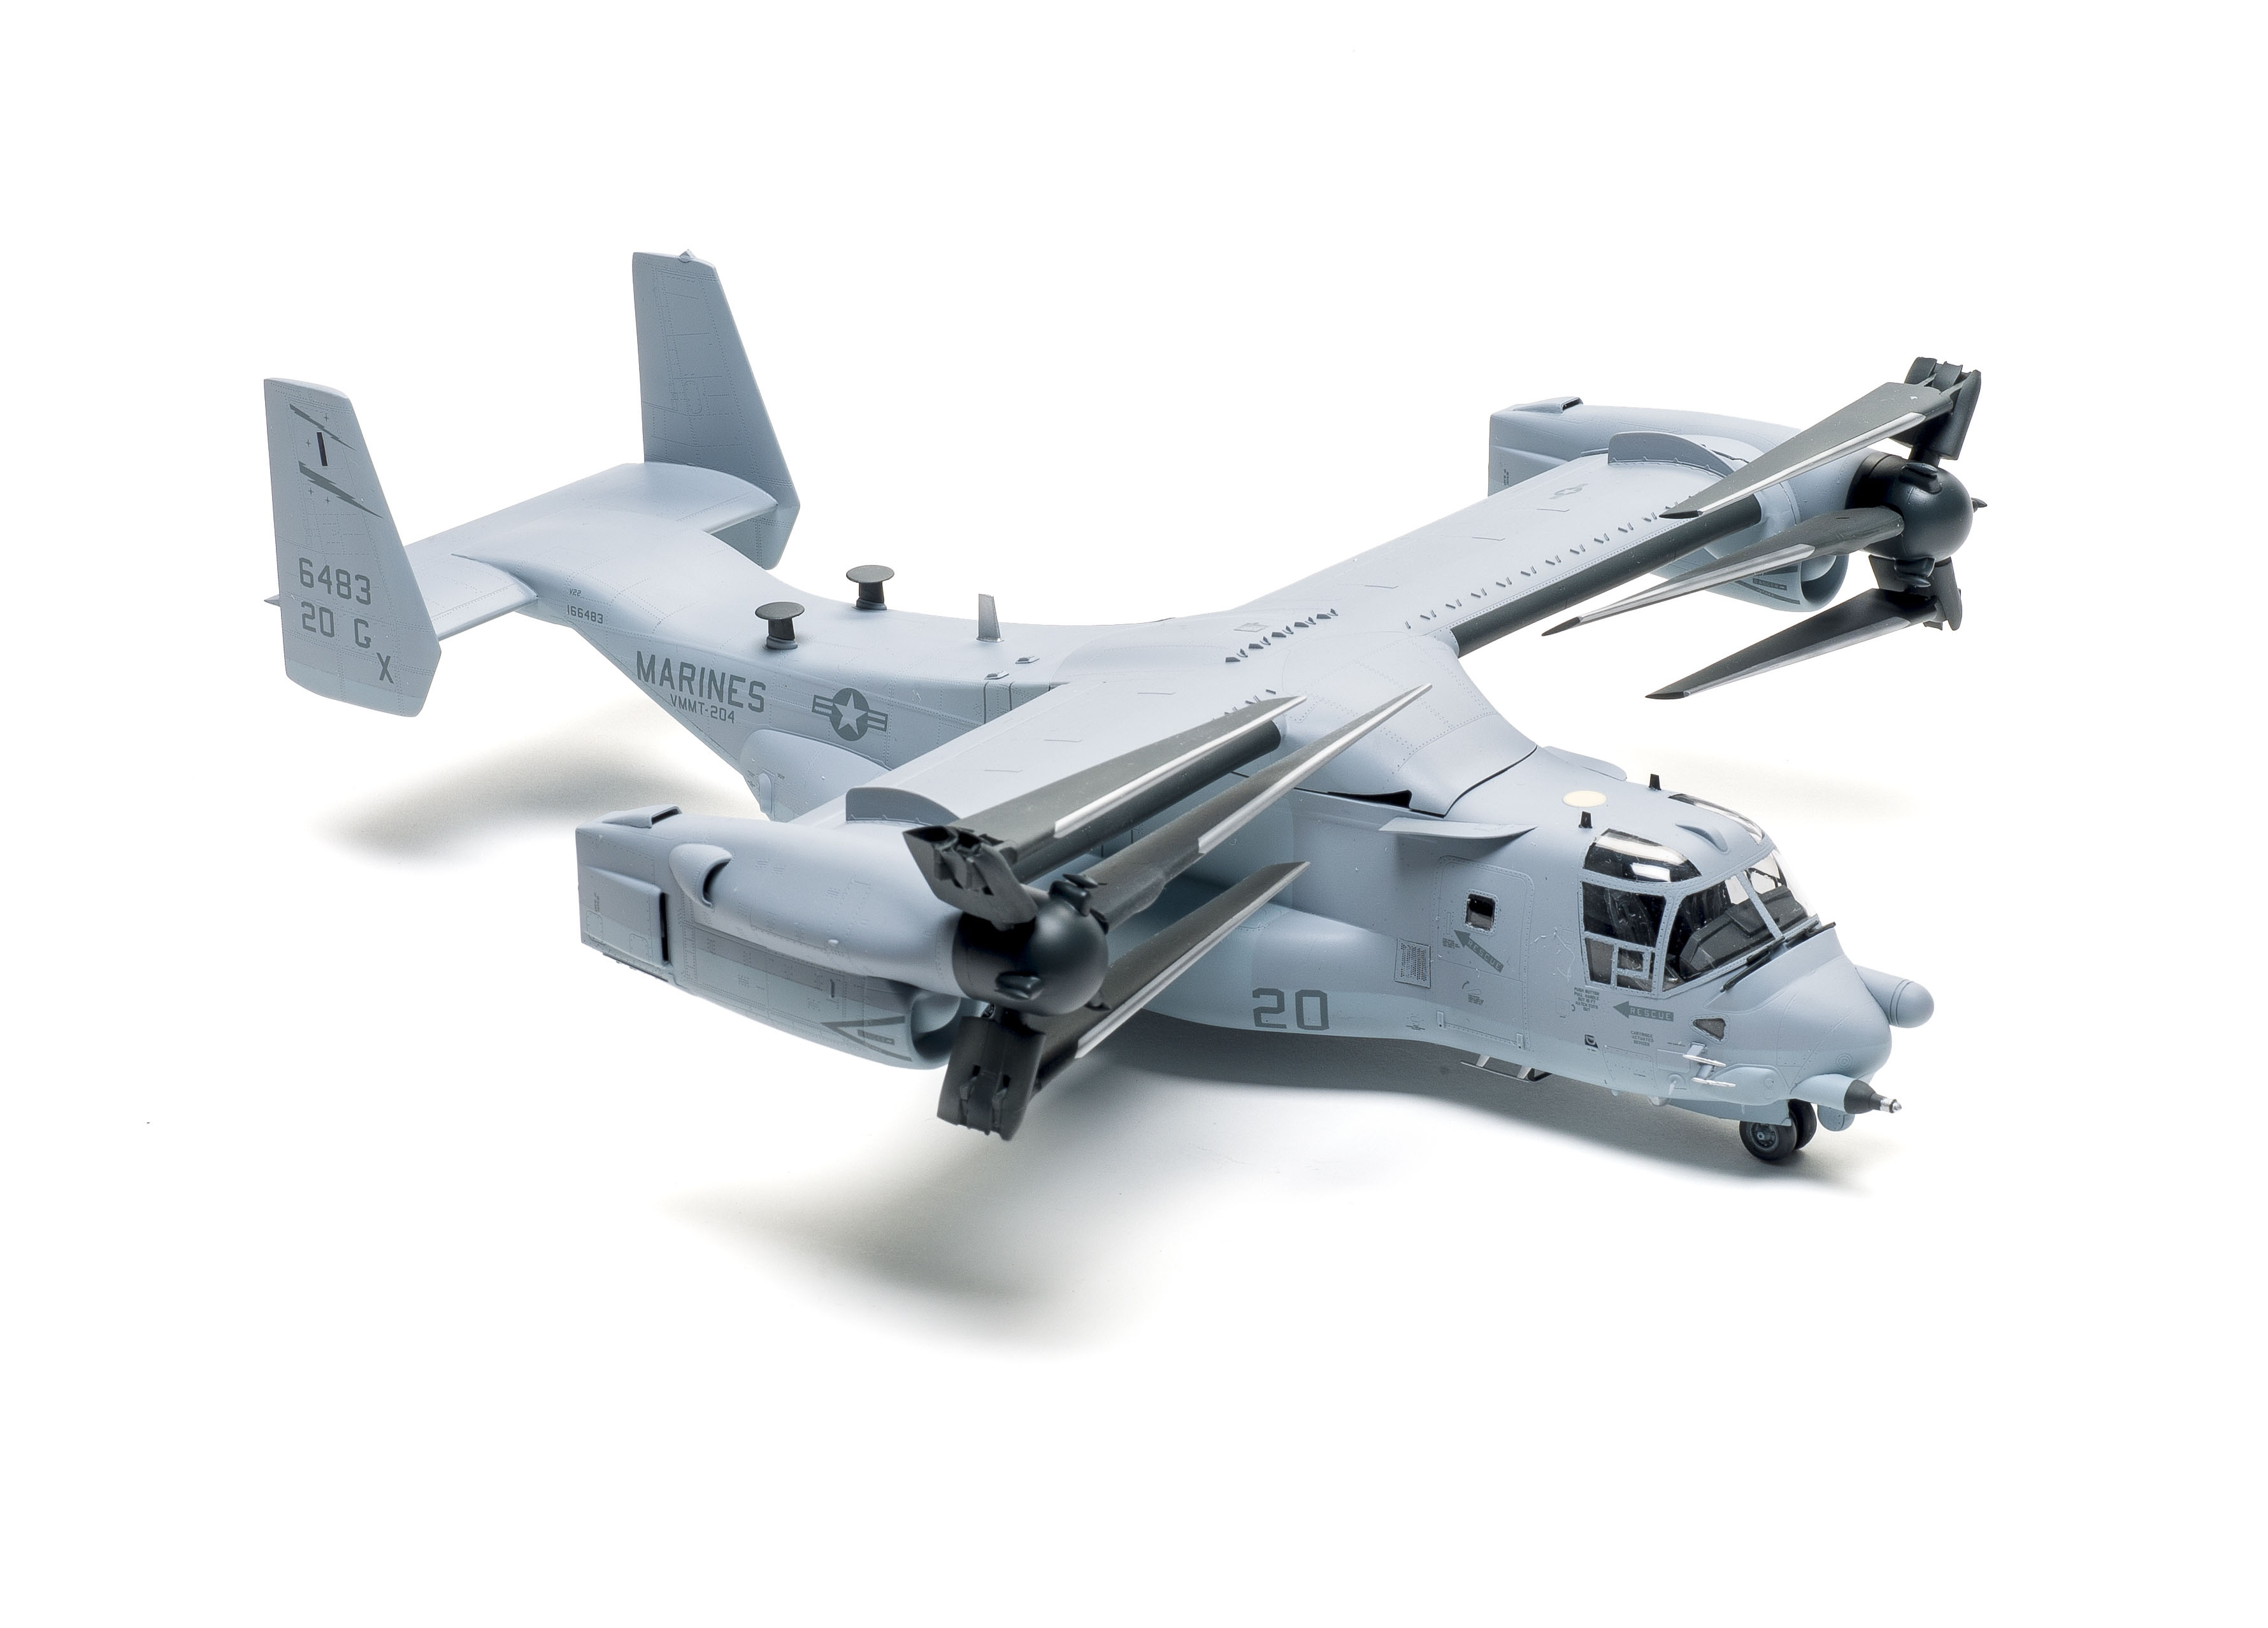 Build review of the HobbyBoss MV-22 Osprey scale model aircraft 